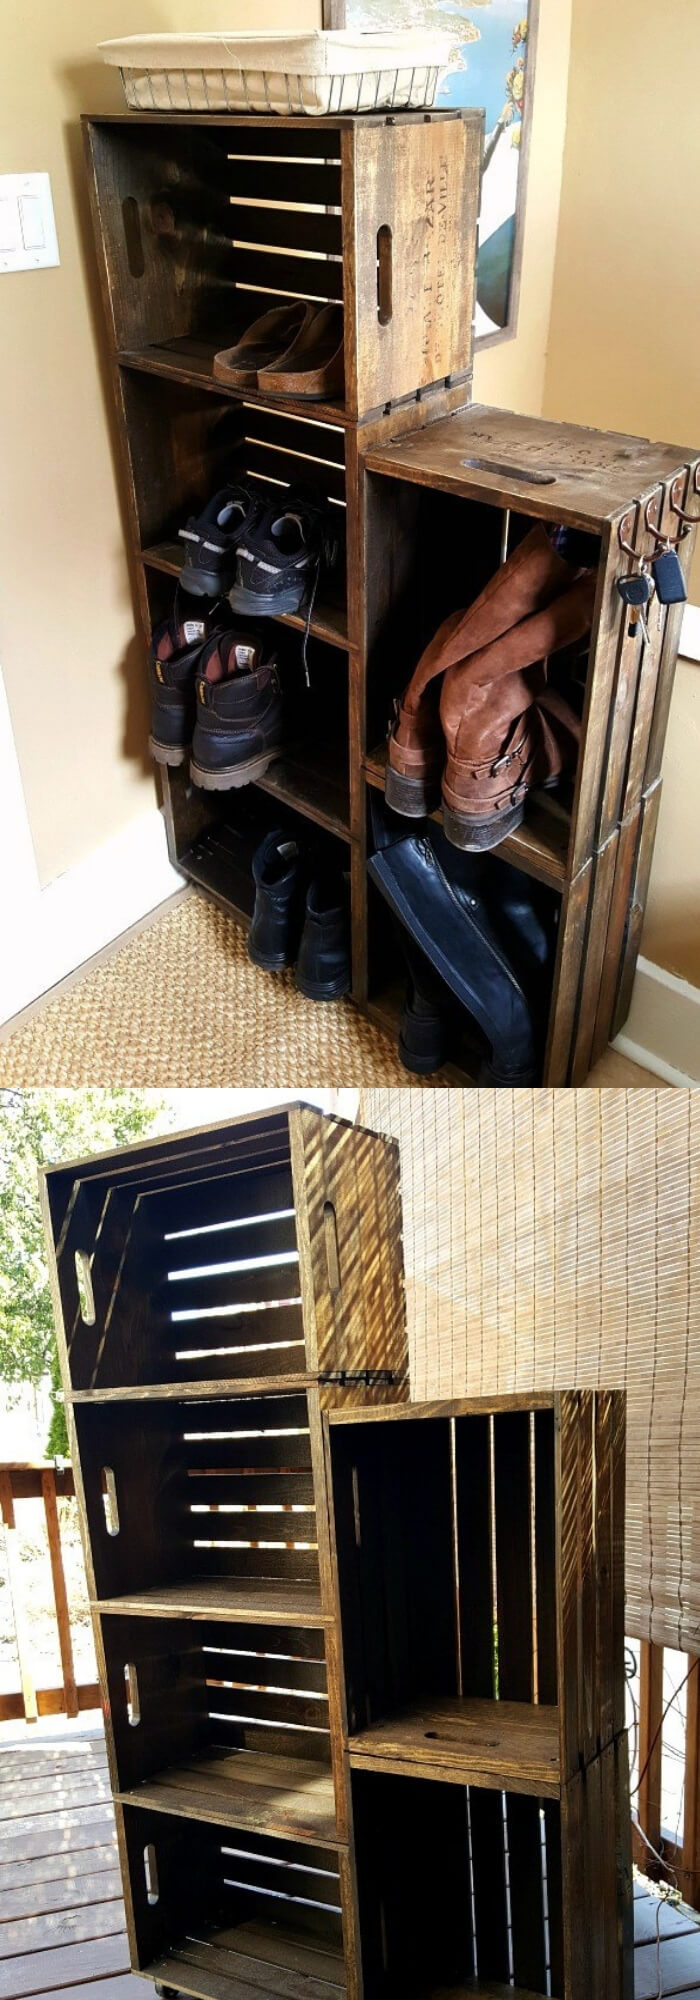 Wooden Crate Shoe Rack | Smart Shoe Storage Ideas & Designs For Any Zoom Size